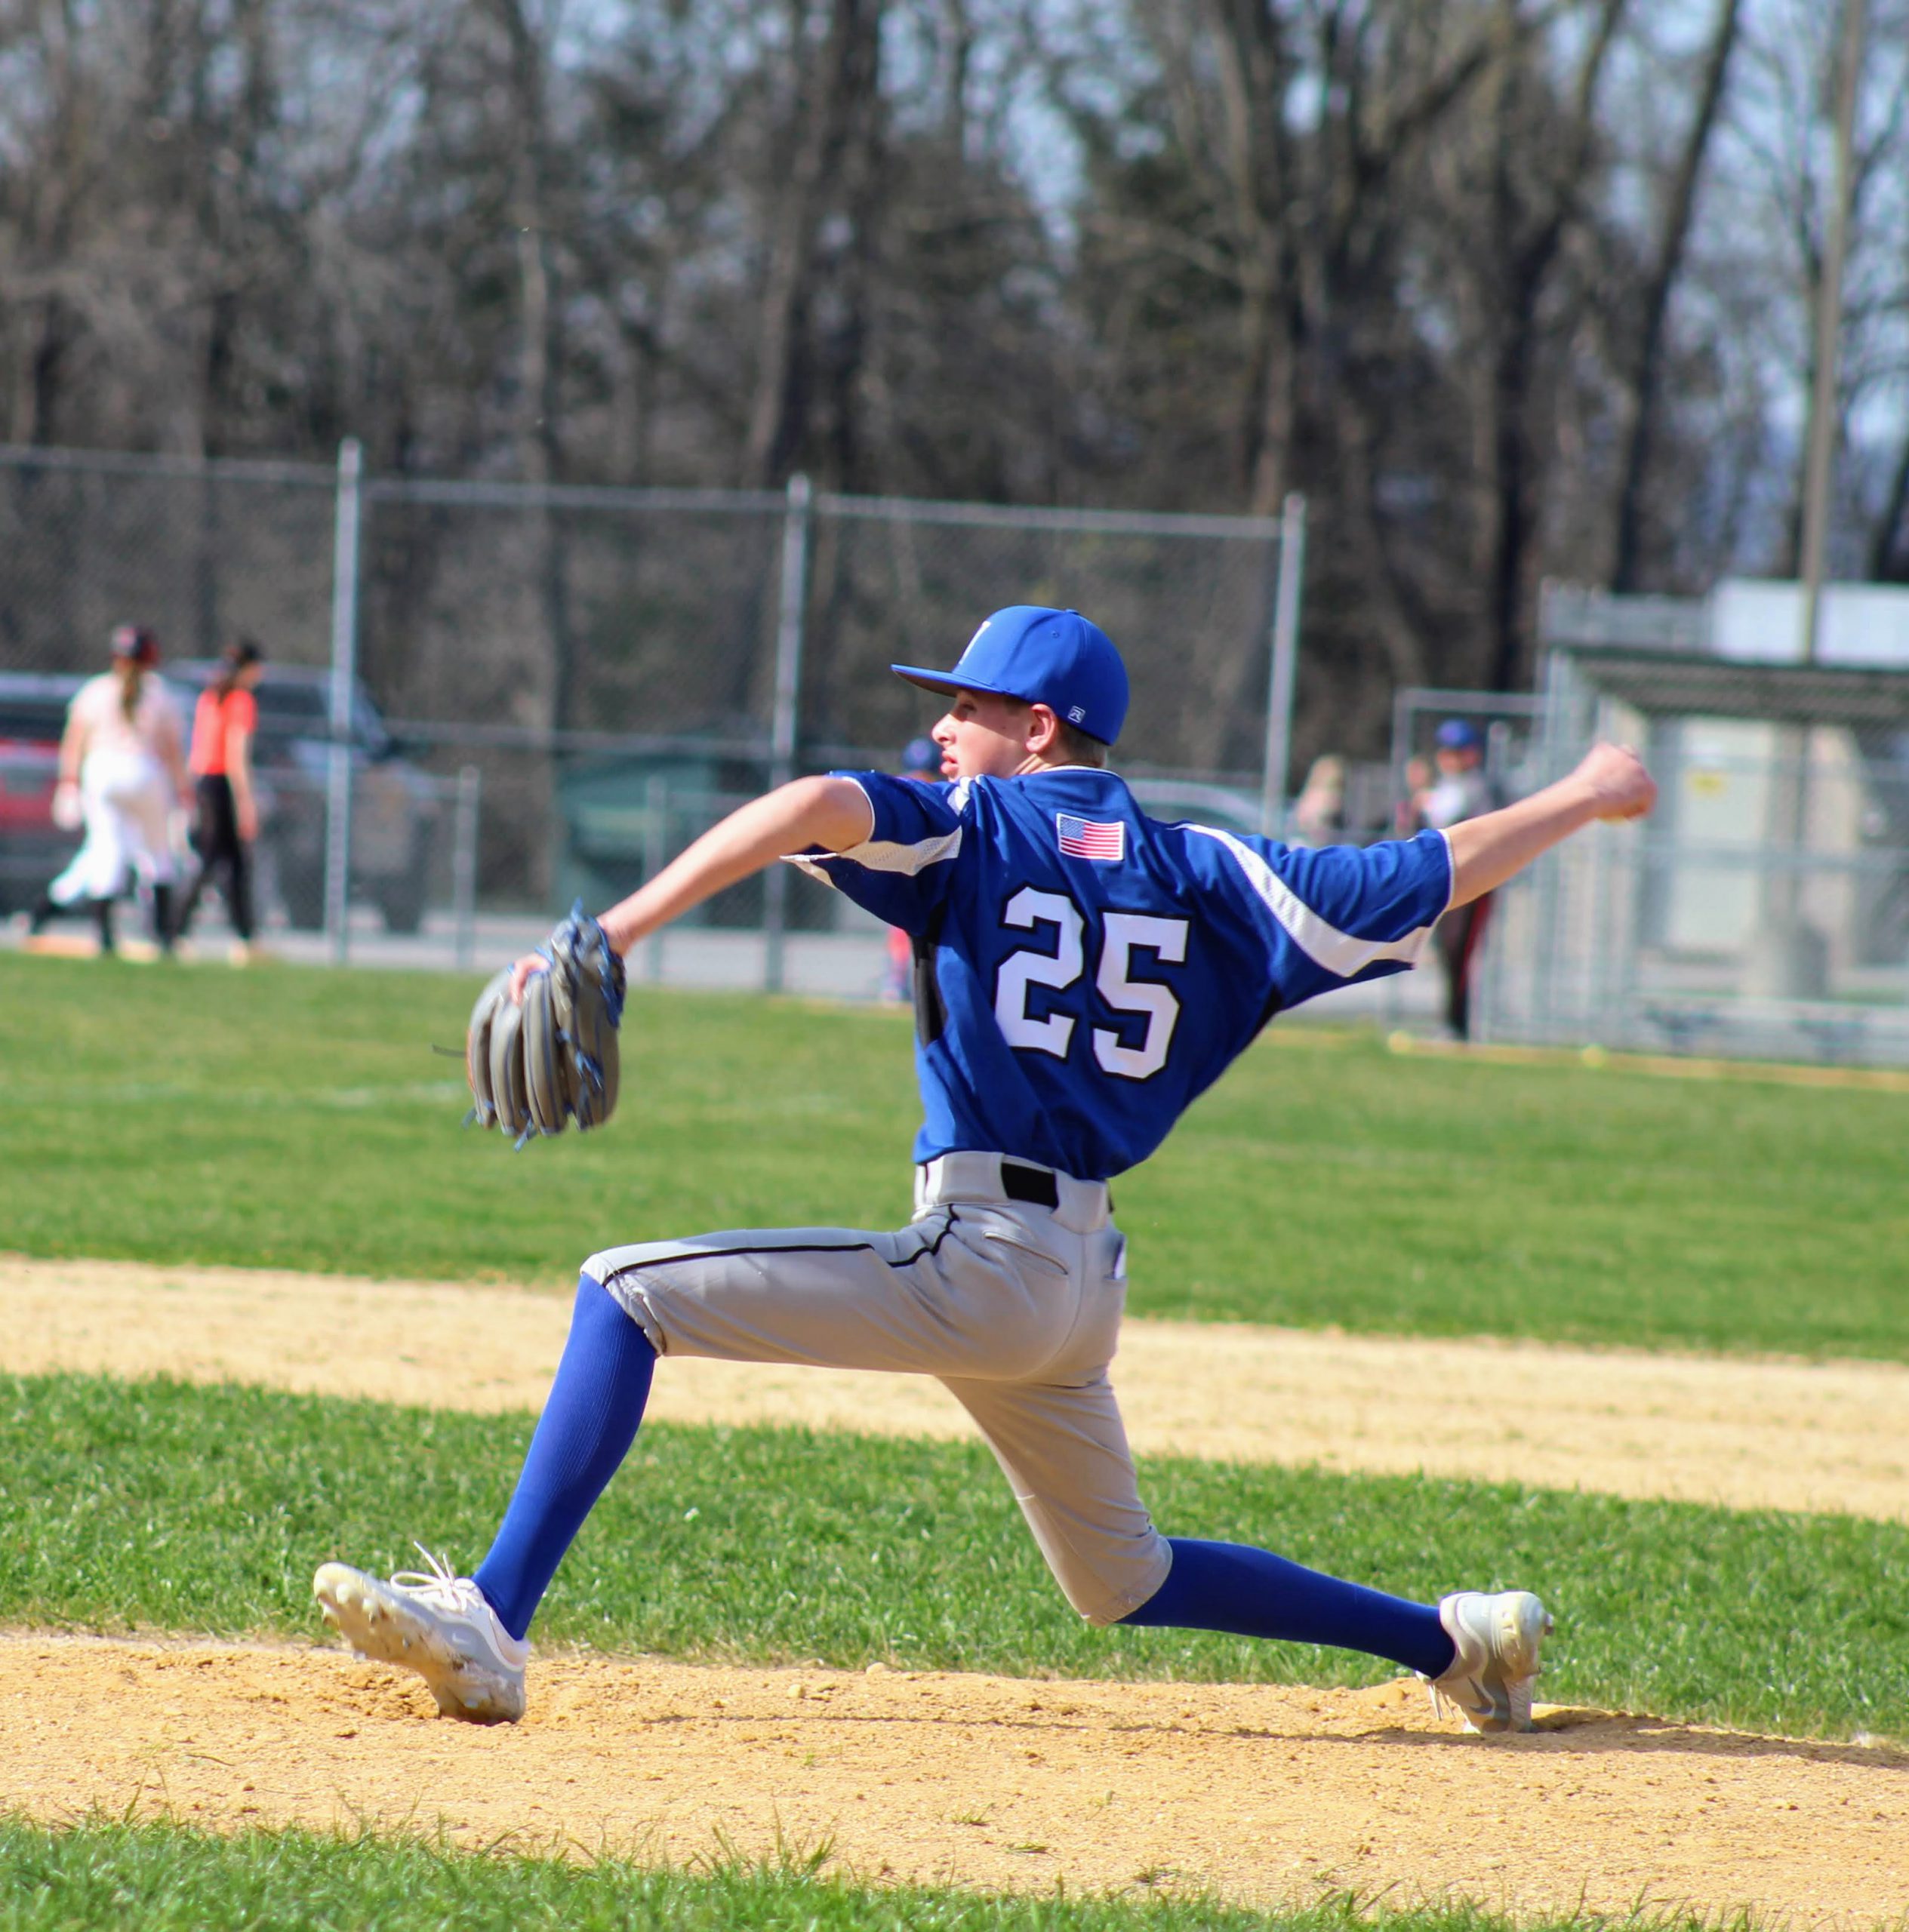 JV Baseball player number 25 pitches the ball from the pritcher's mound